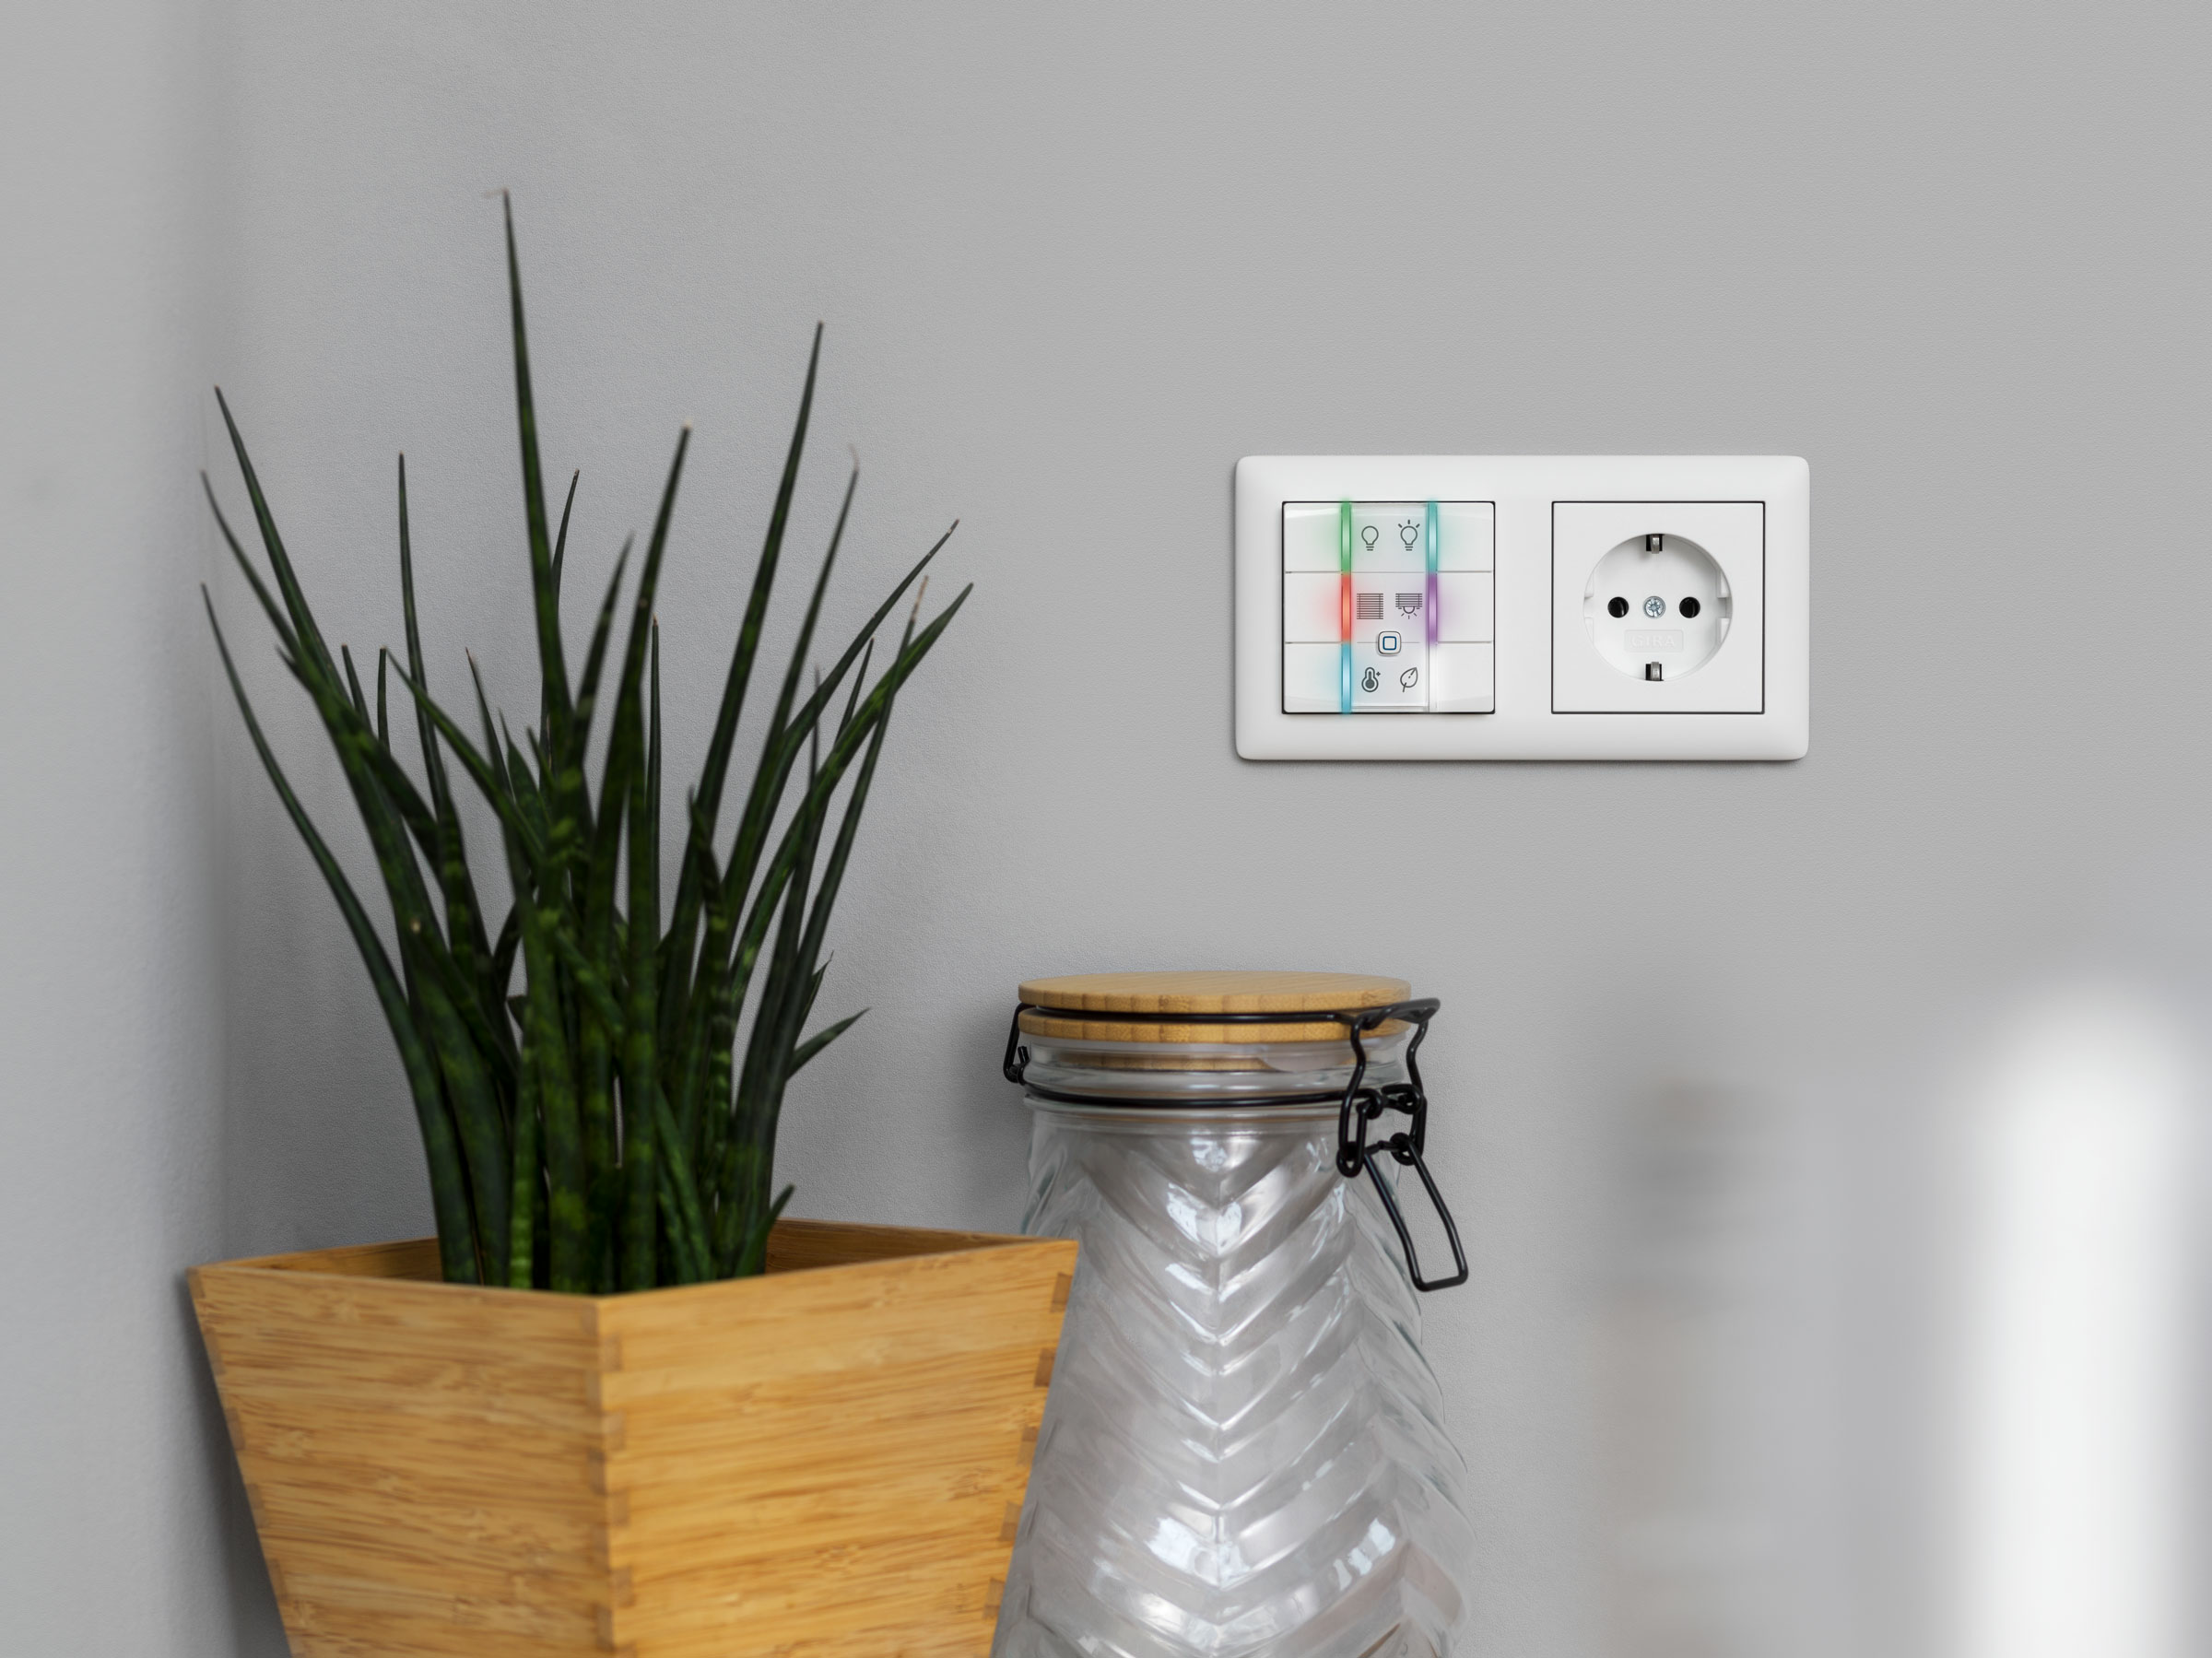 Wired wall-mounted remote control – 6 channels | Homematic IP